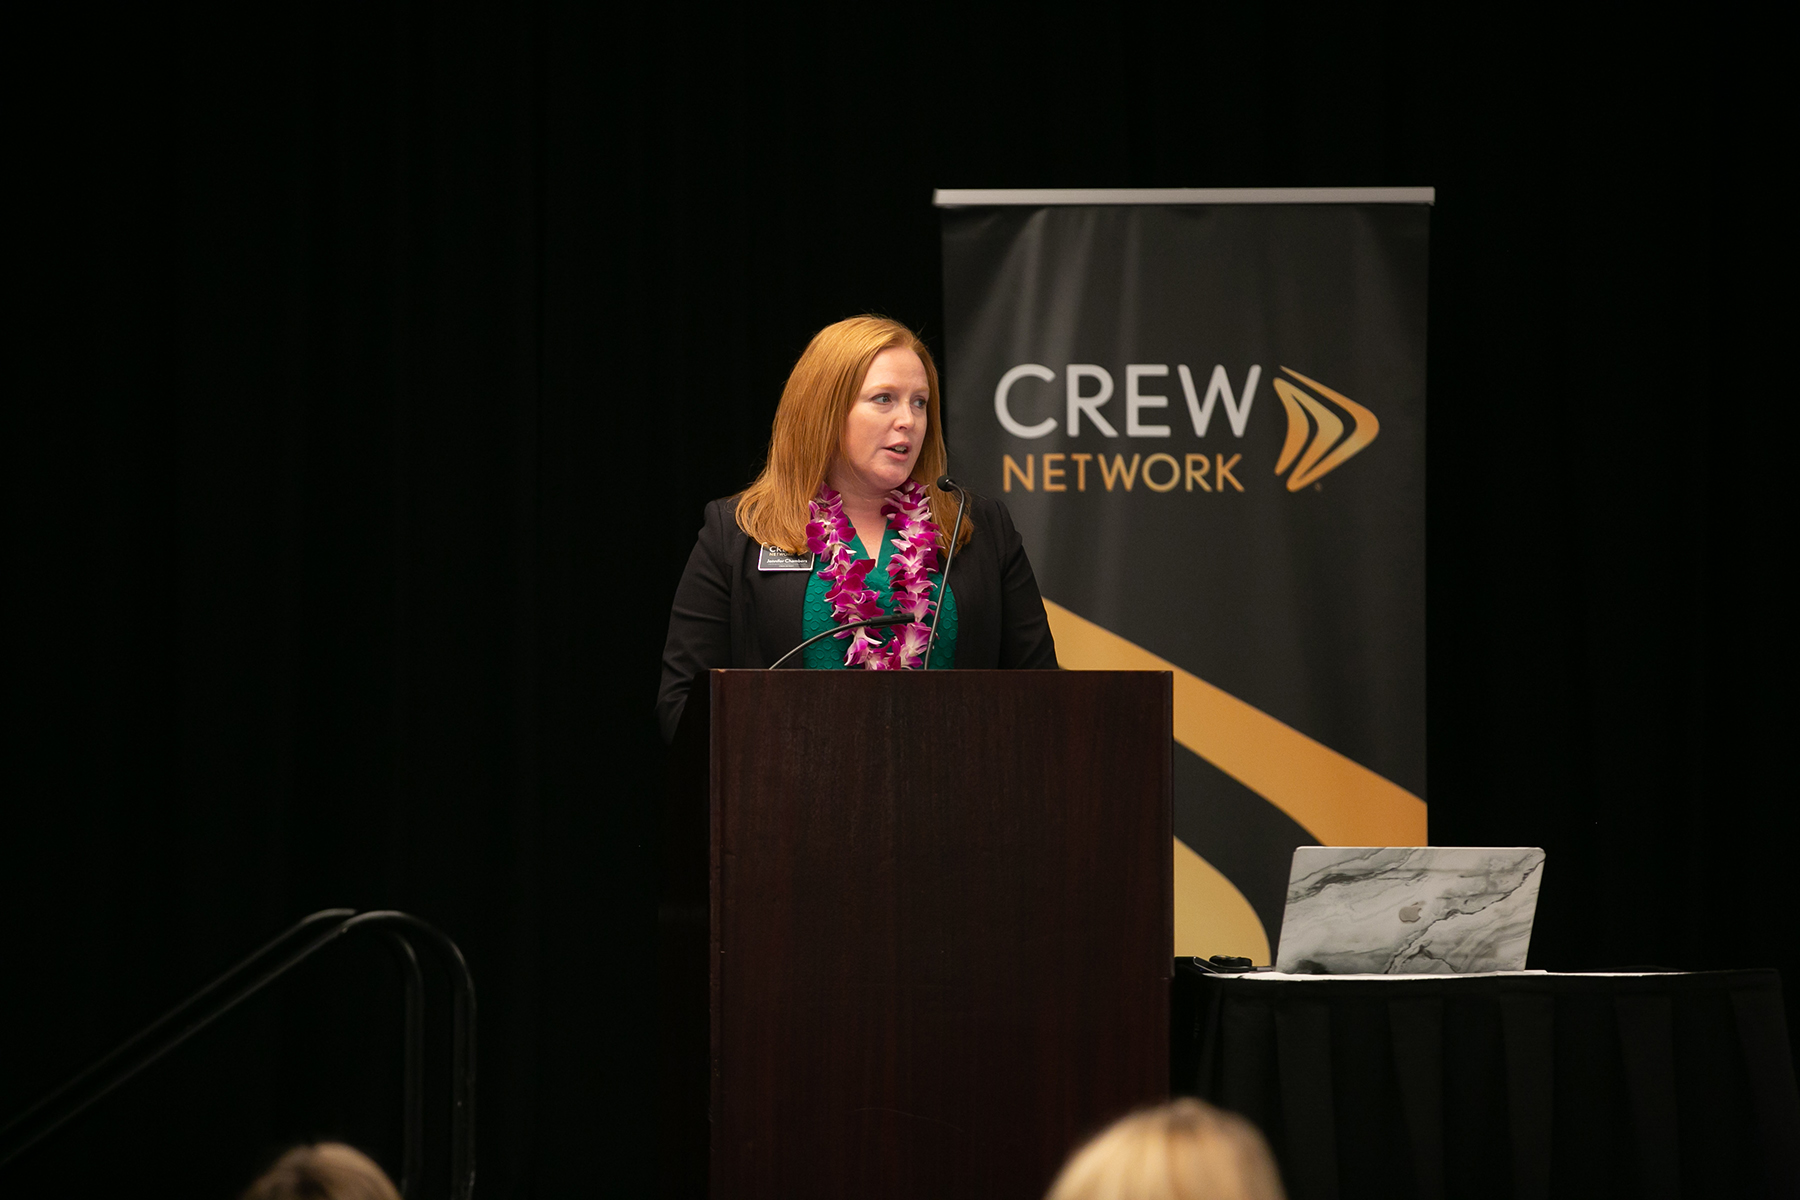 speaker at podium in front of CREW Network sign